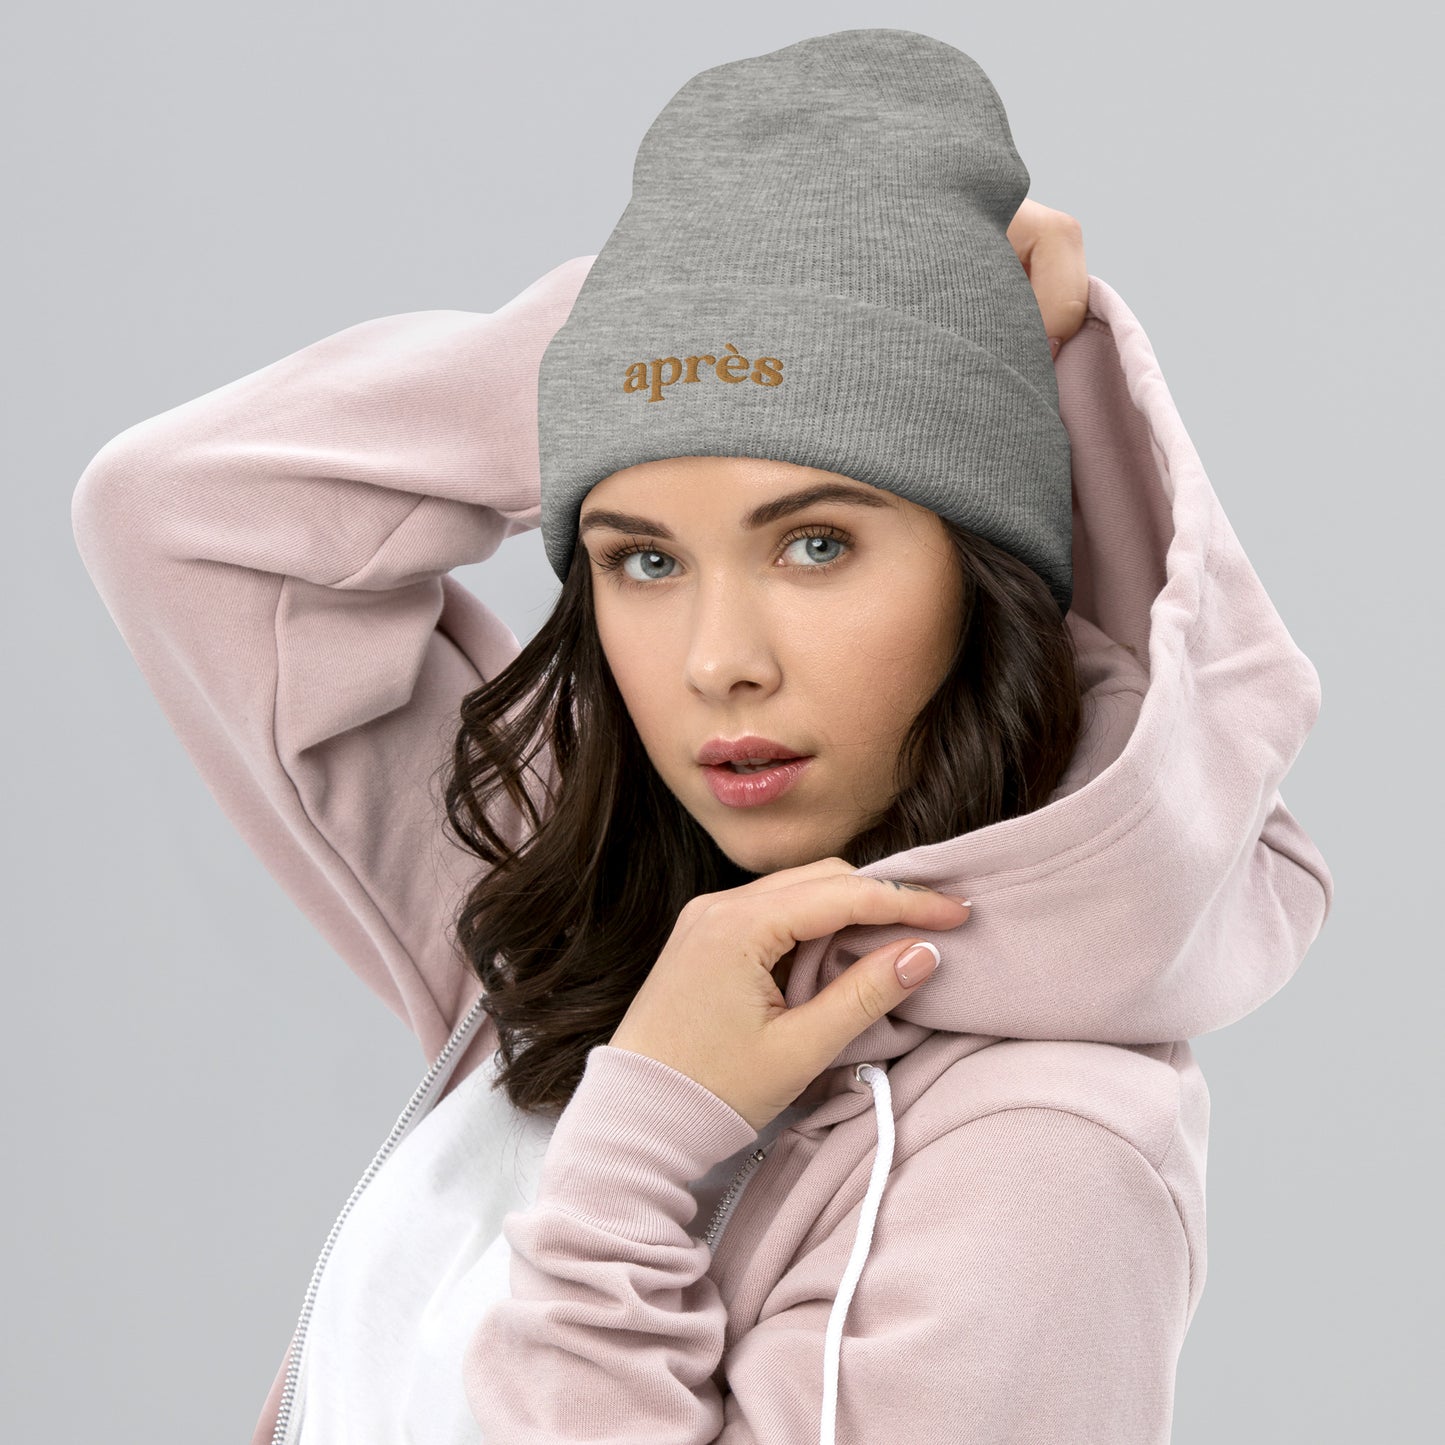 Après Gold Embroidered Beanie